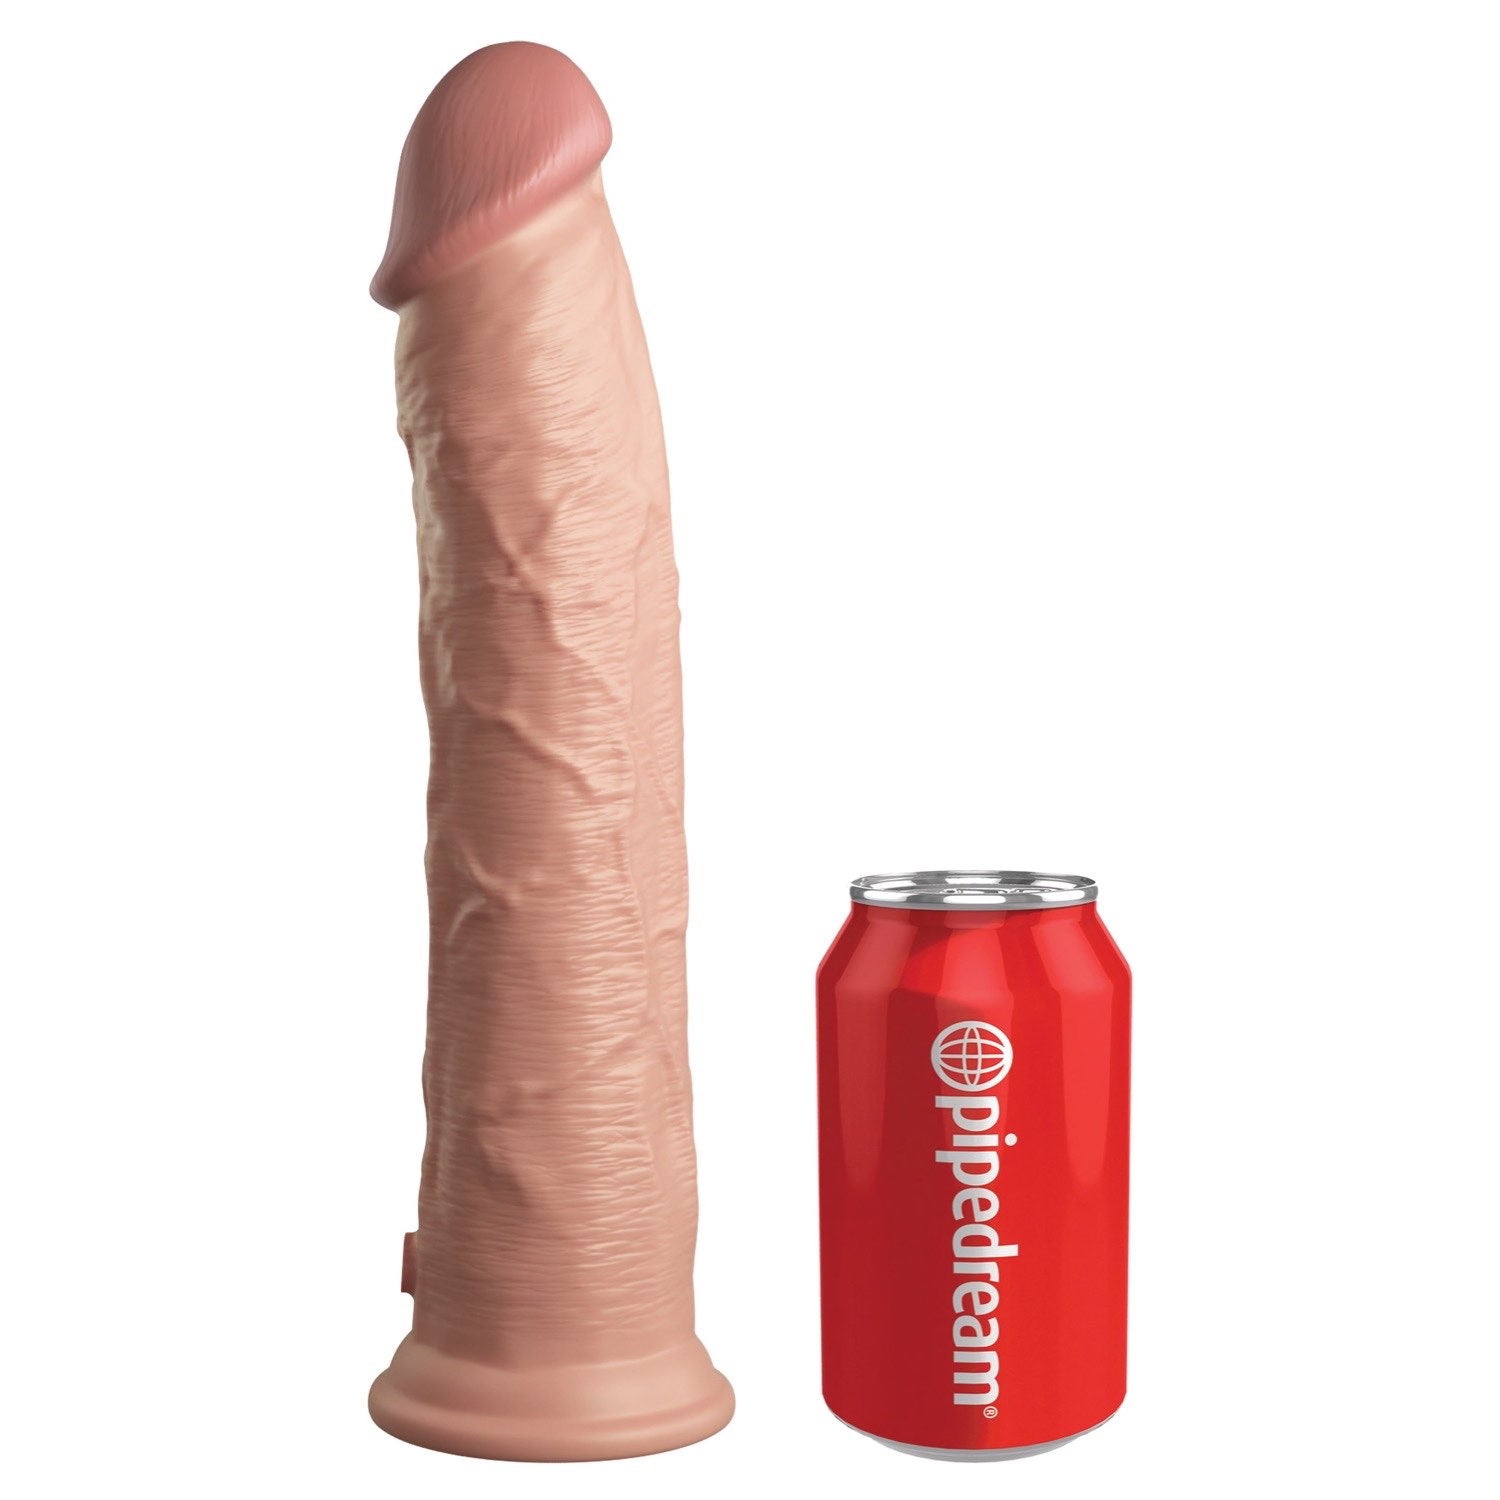 King Cock Elite 11&quot; Dual Density Cock - Flesh - Flesh 28 cm Dong by Pipedream